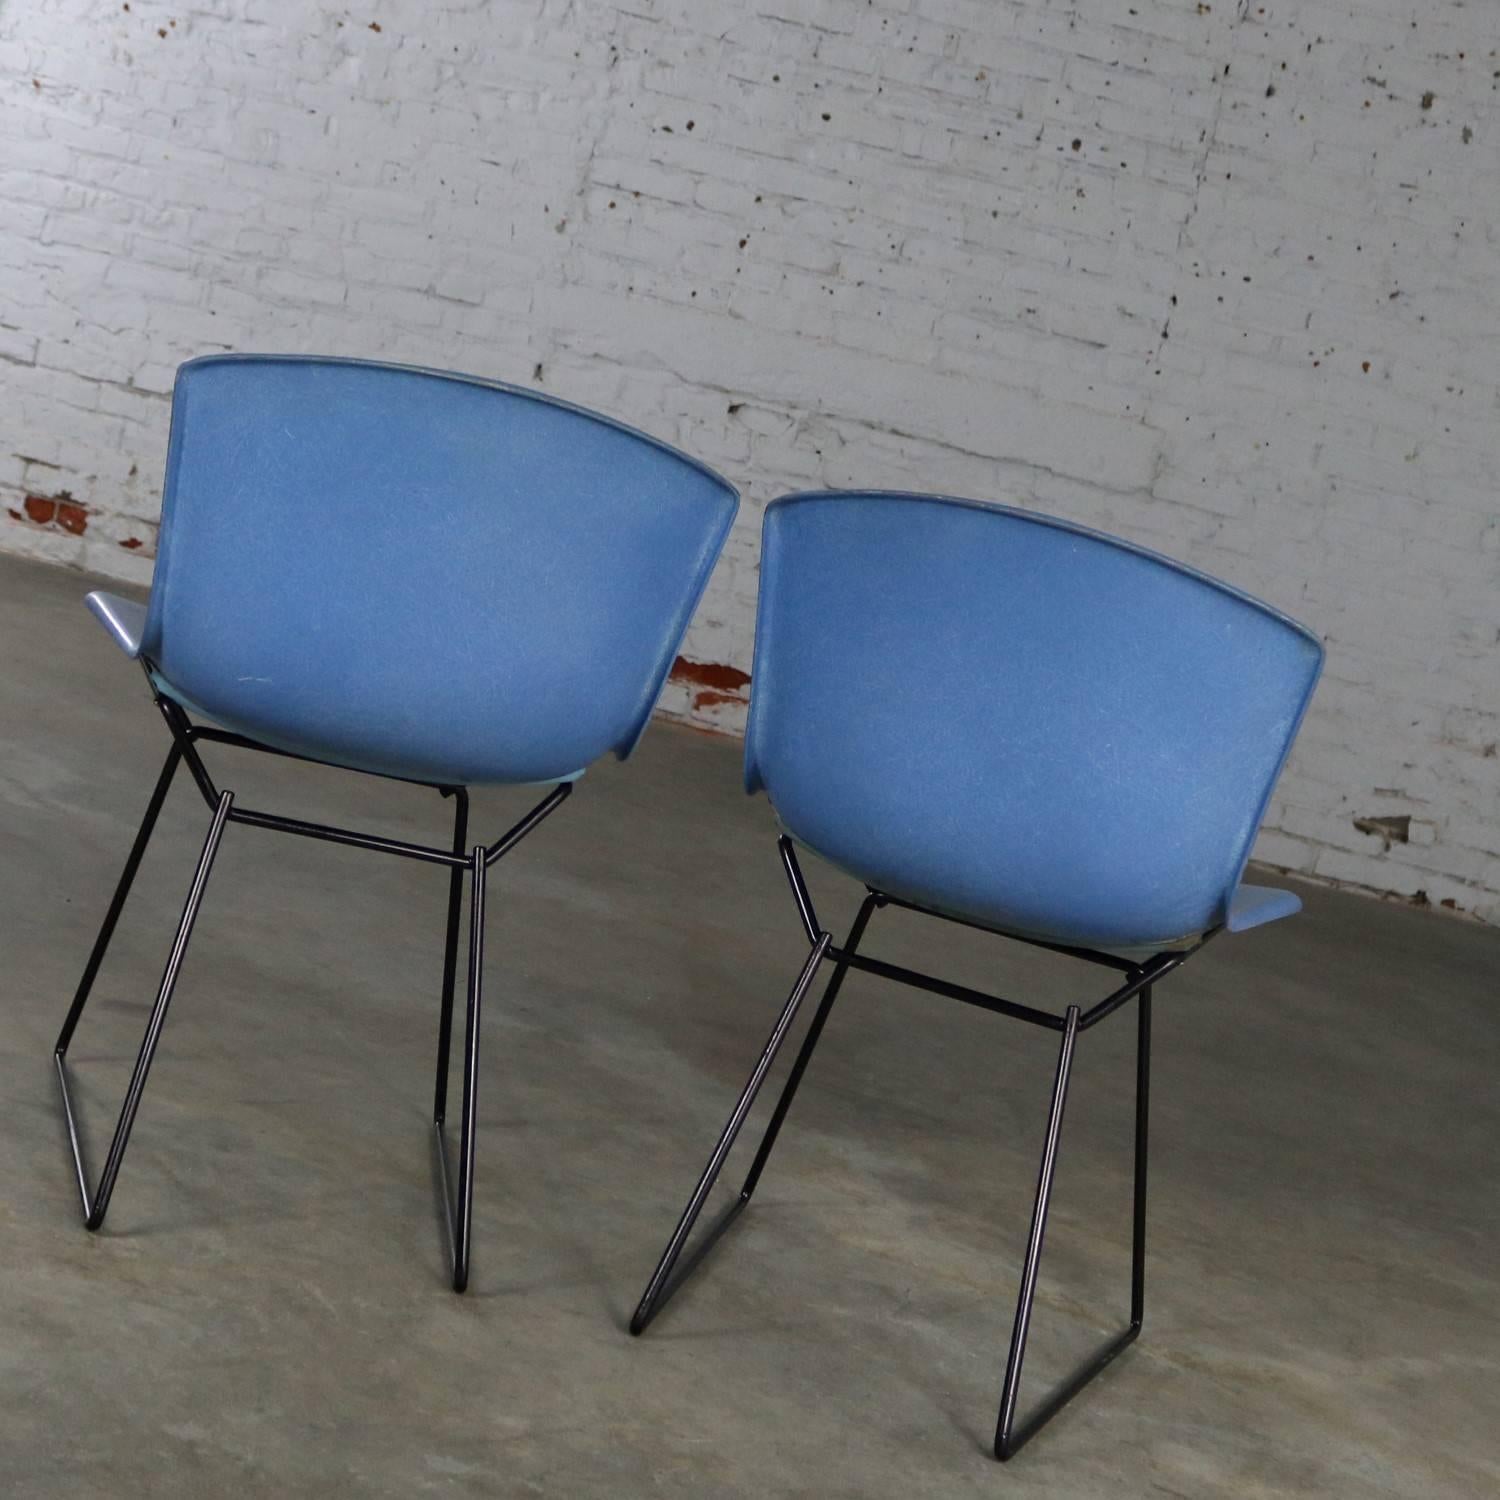 20th Century Pair of Harry Bertoia for Knoll Blue Fiberglass Side Chairs Black Wire Base